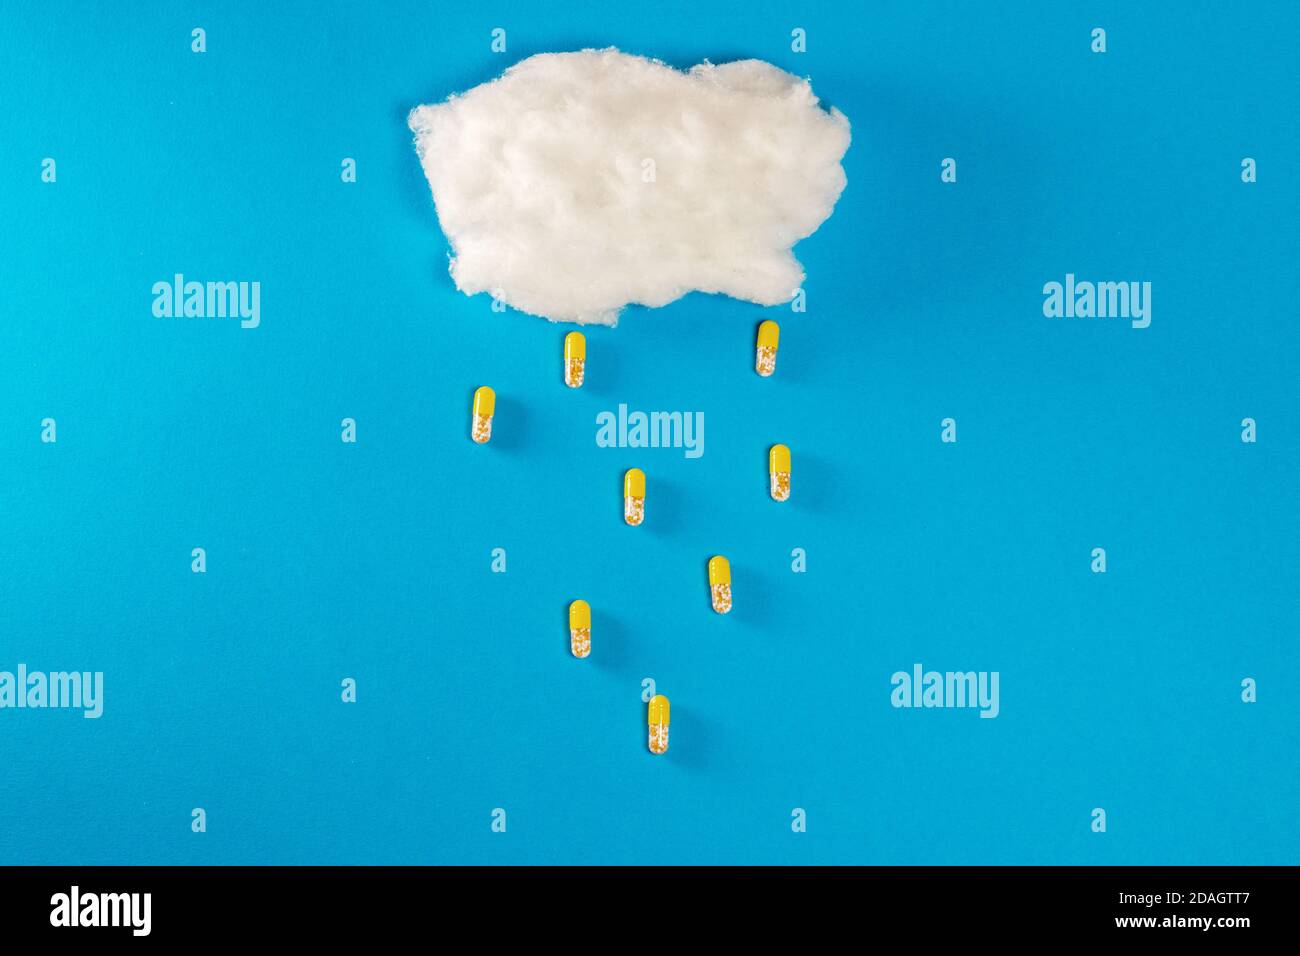 Cloud made of foam on blue background with pills as rain drops Stock Photo